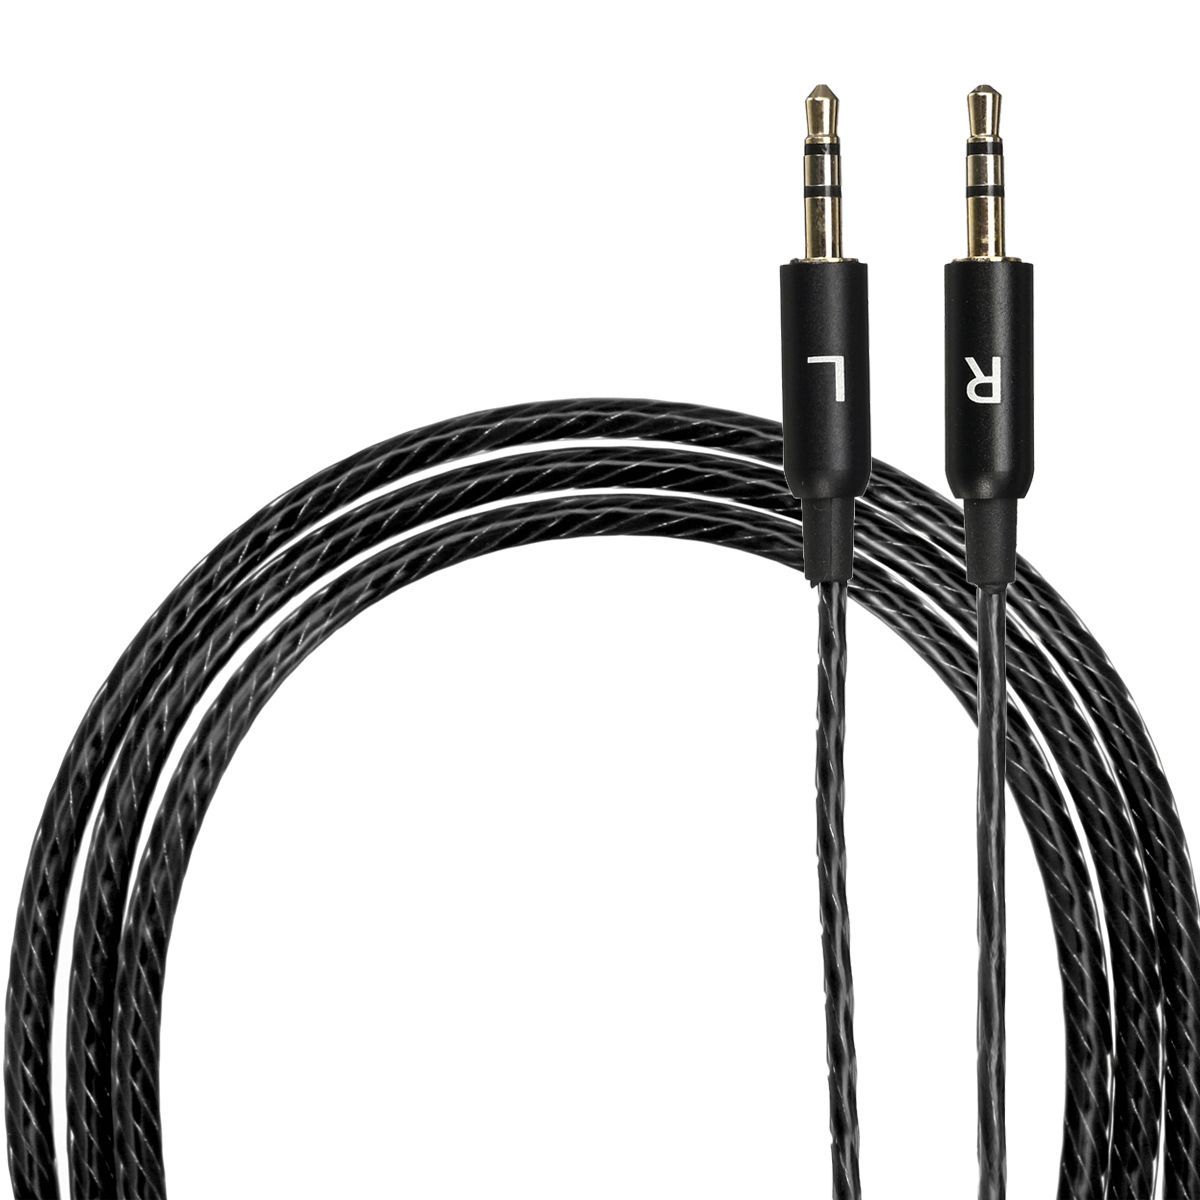 Replacement-Nylon-Flexural-12m-Audio-Cable-with-Microphone-for-Sol-Republic-Master-Tracks-HD-V8-V10--1460109